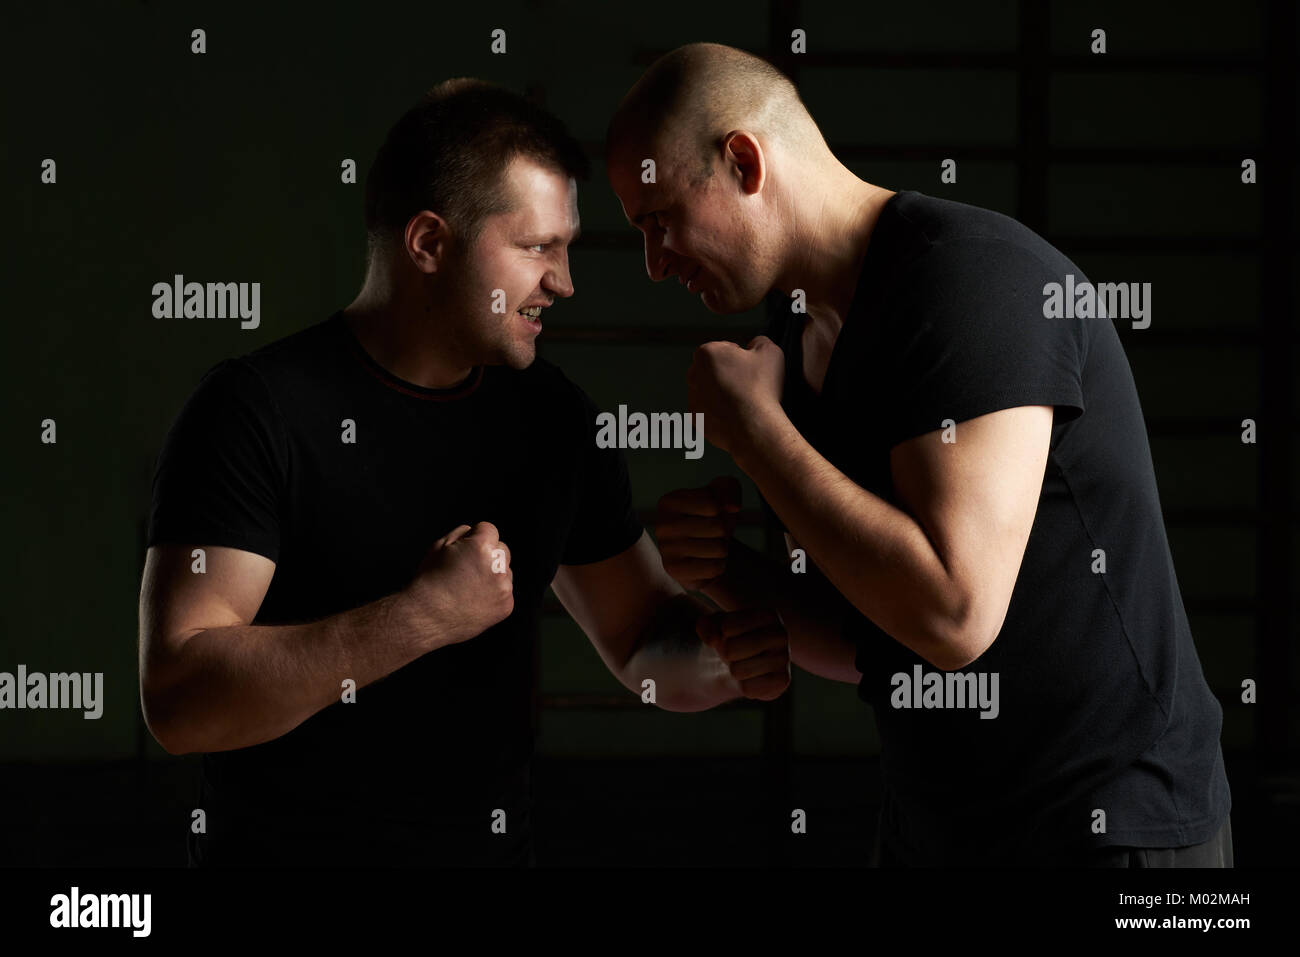 Two angry young man concept. Conflict situation between people Stock Photo